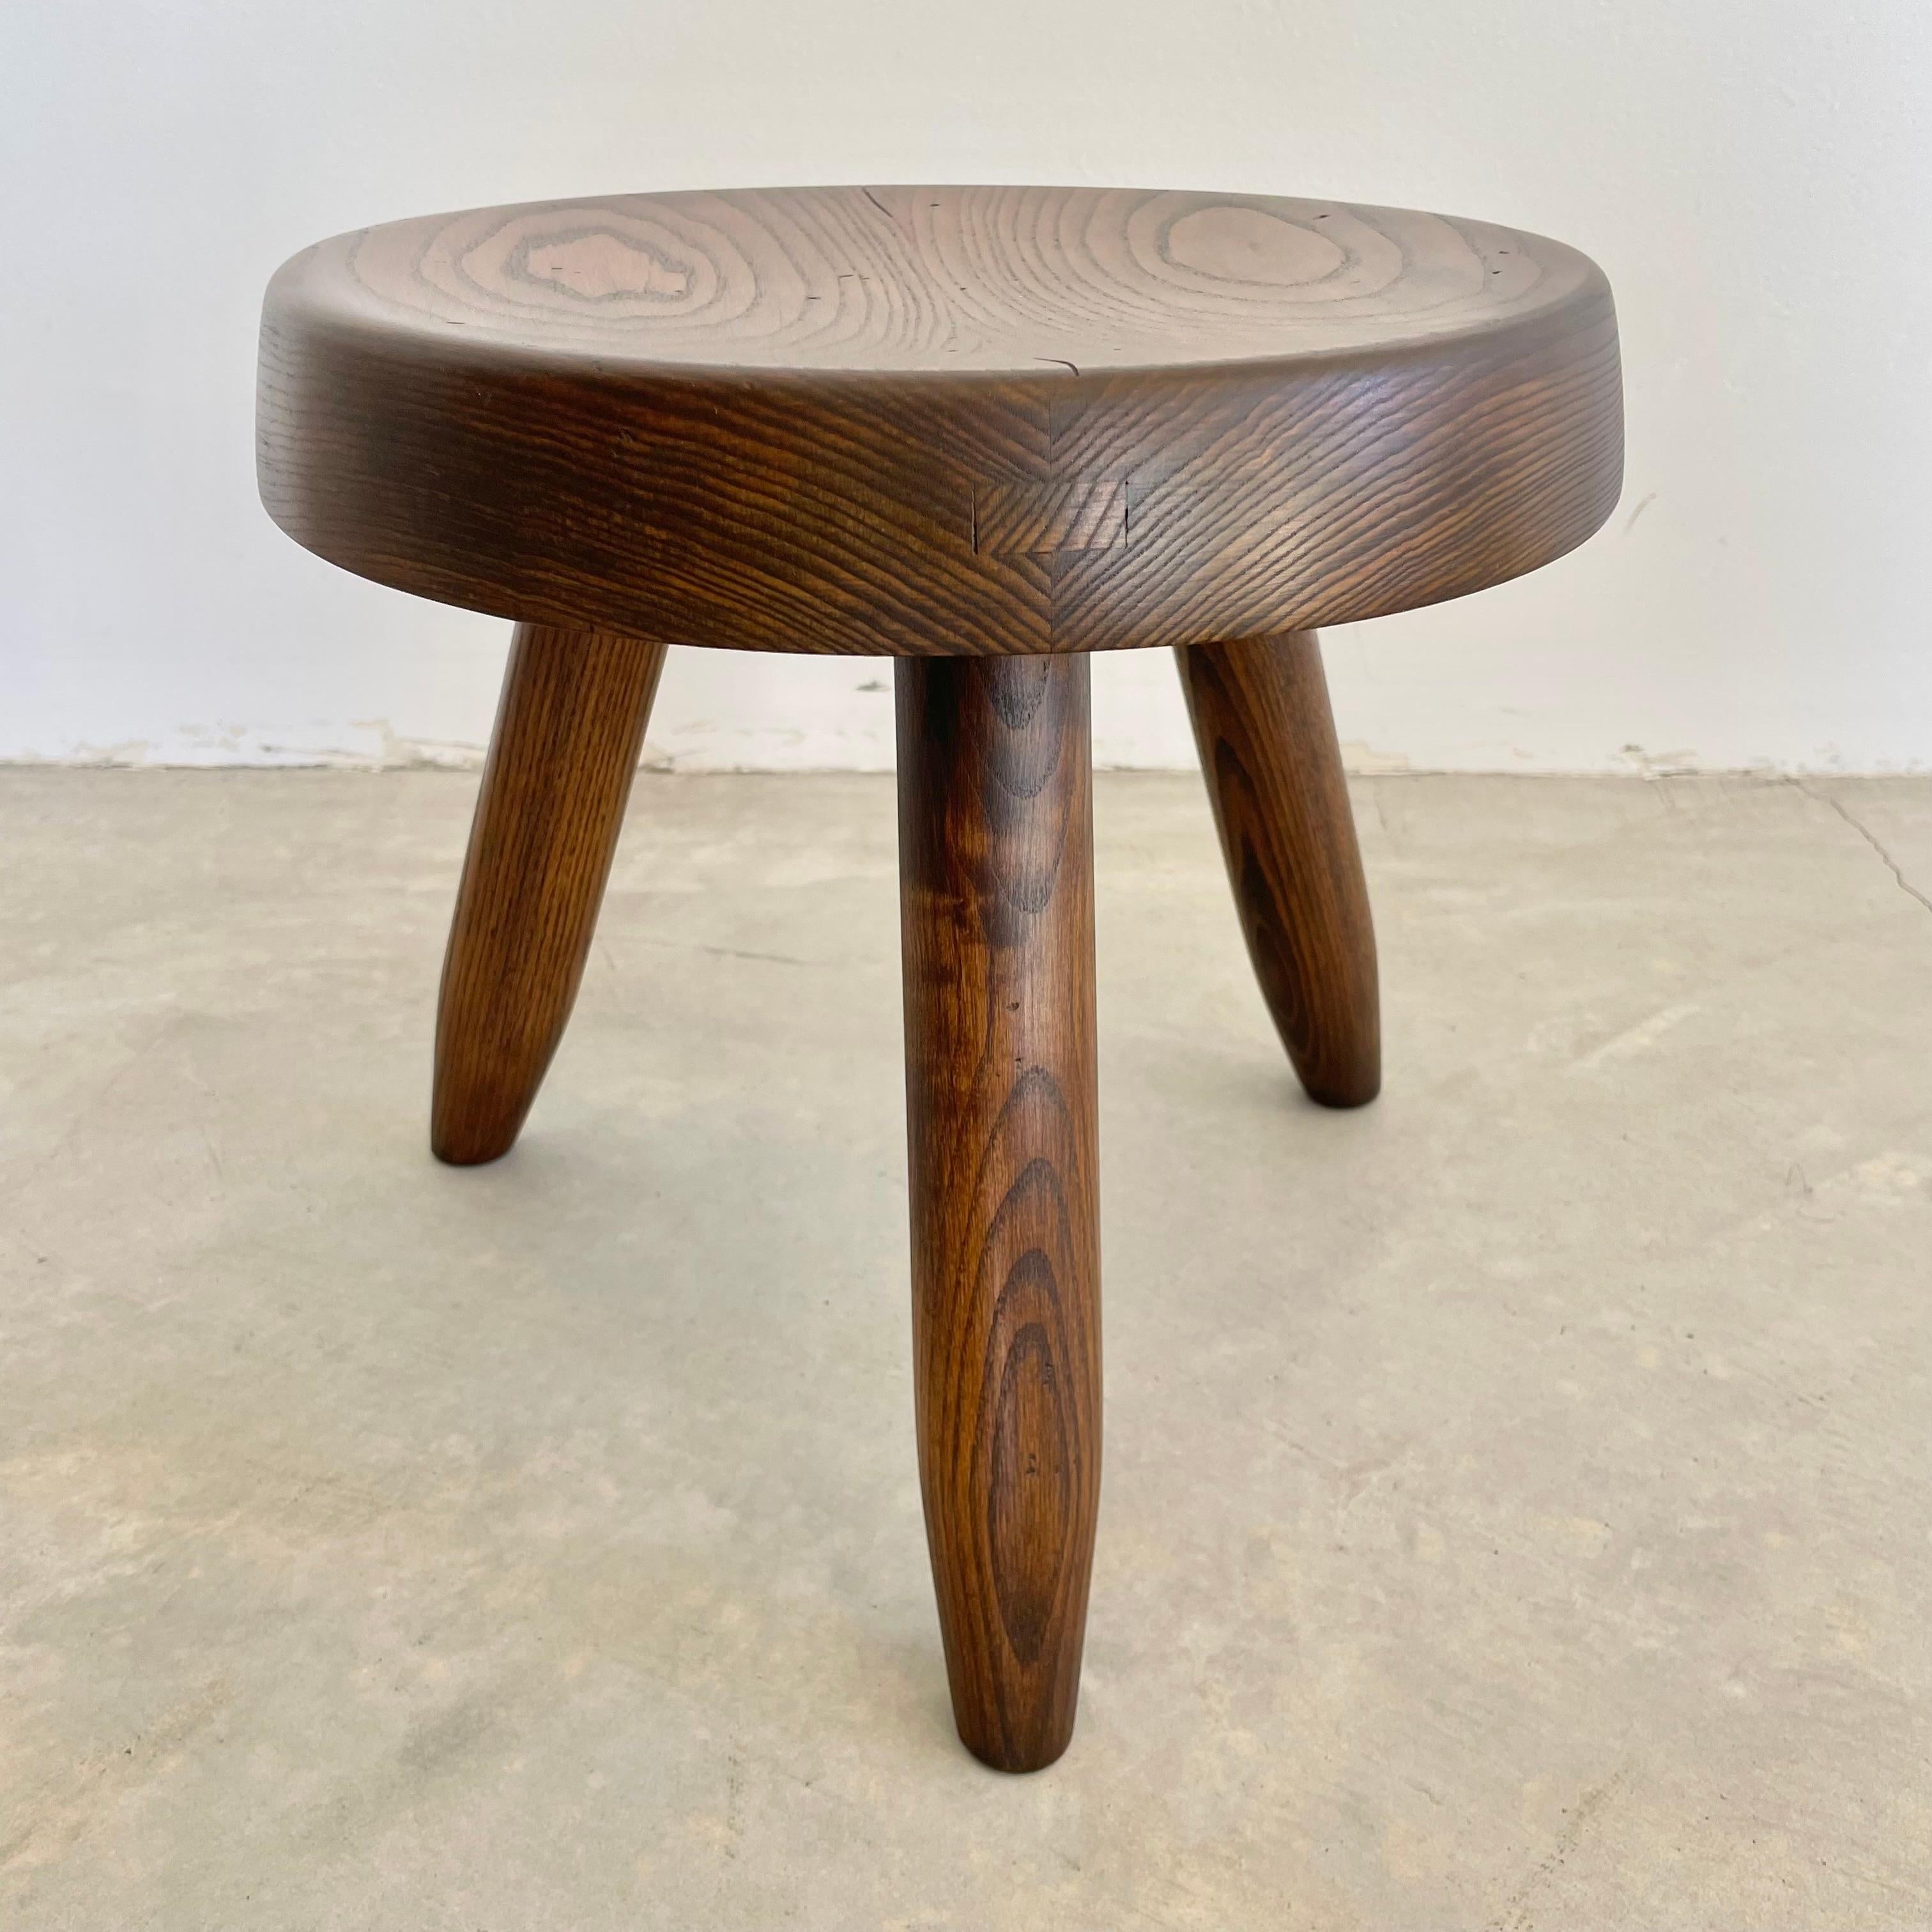 Collectible Berger stool by Charlotte Perriand in an elegant dark finish. Circa 1950s. You can find this stool featured in the Charlotte Perriand complete works Volume 2.